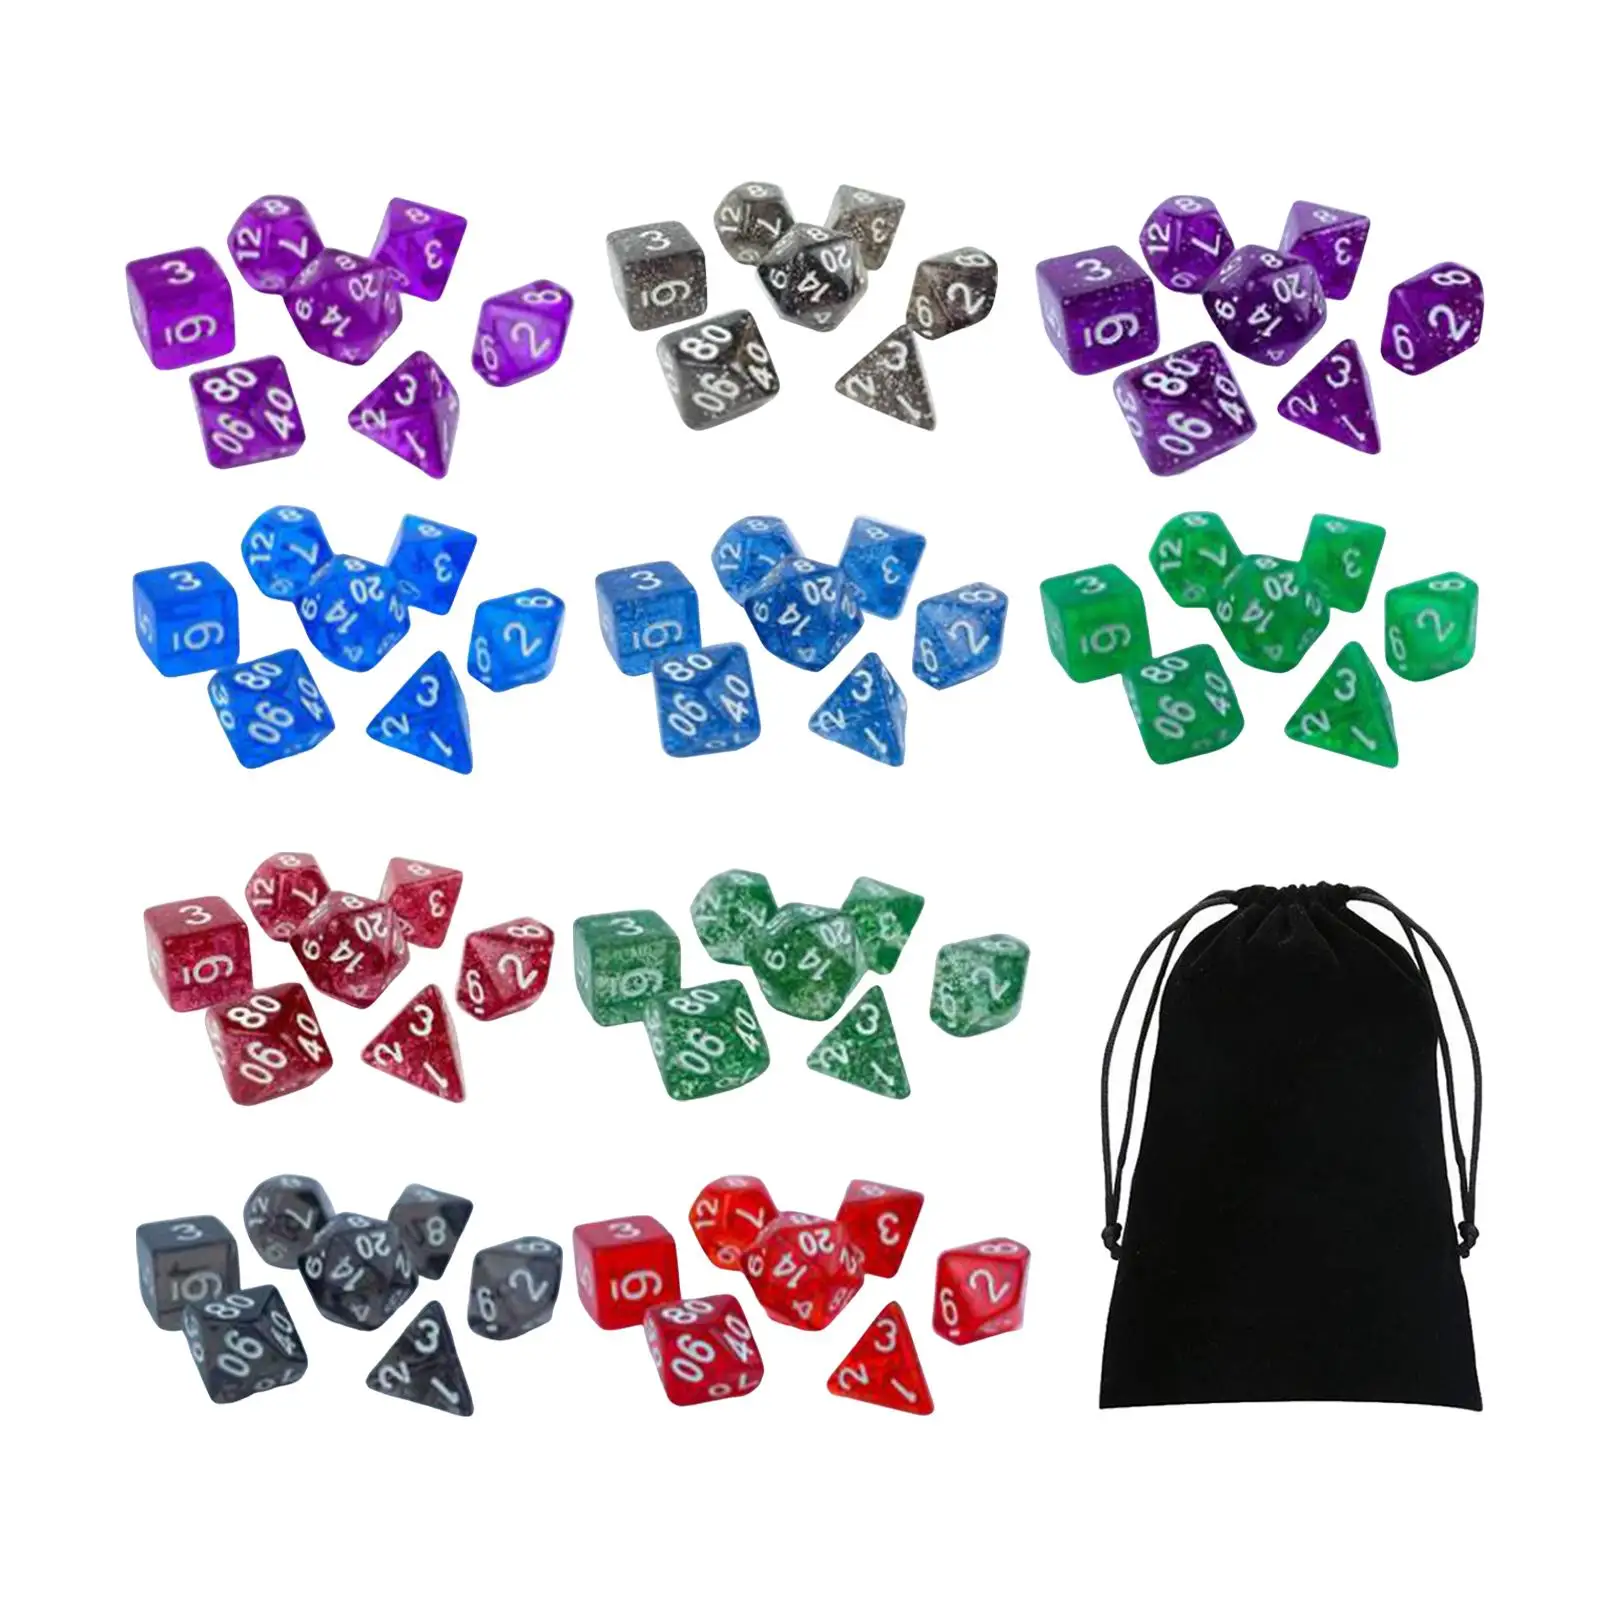 70Pcs Acrylic Dice Sets Entertainment Toy with Storage Bag Game Props Dice Polyhedral Dice Set for D10 D12 D6 D4 D8